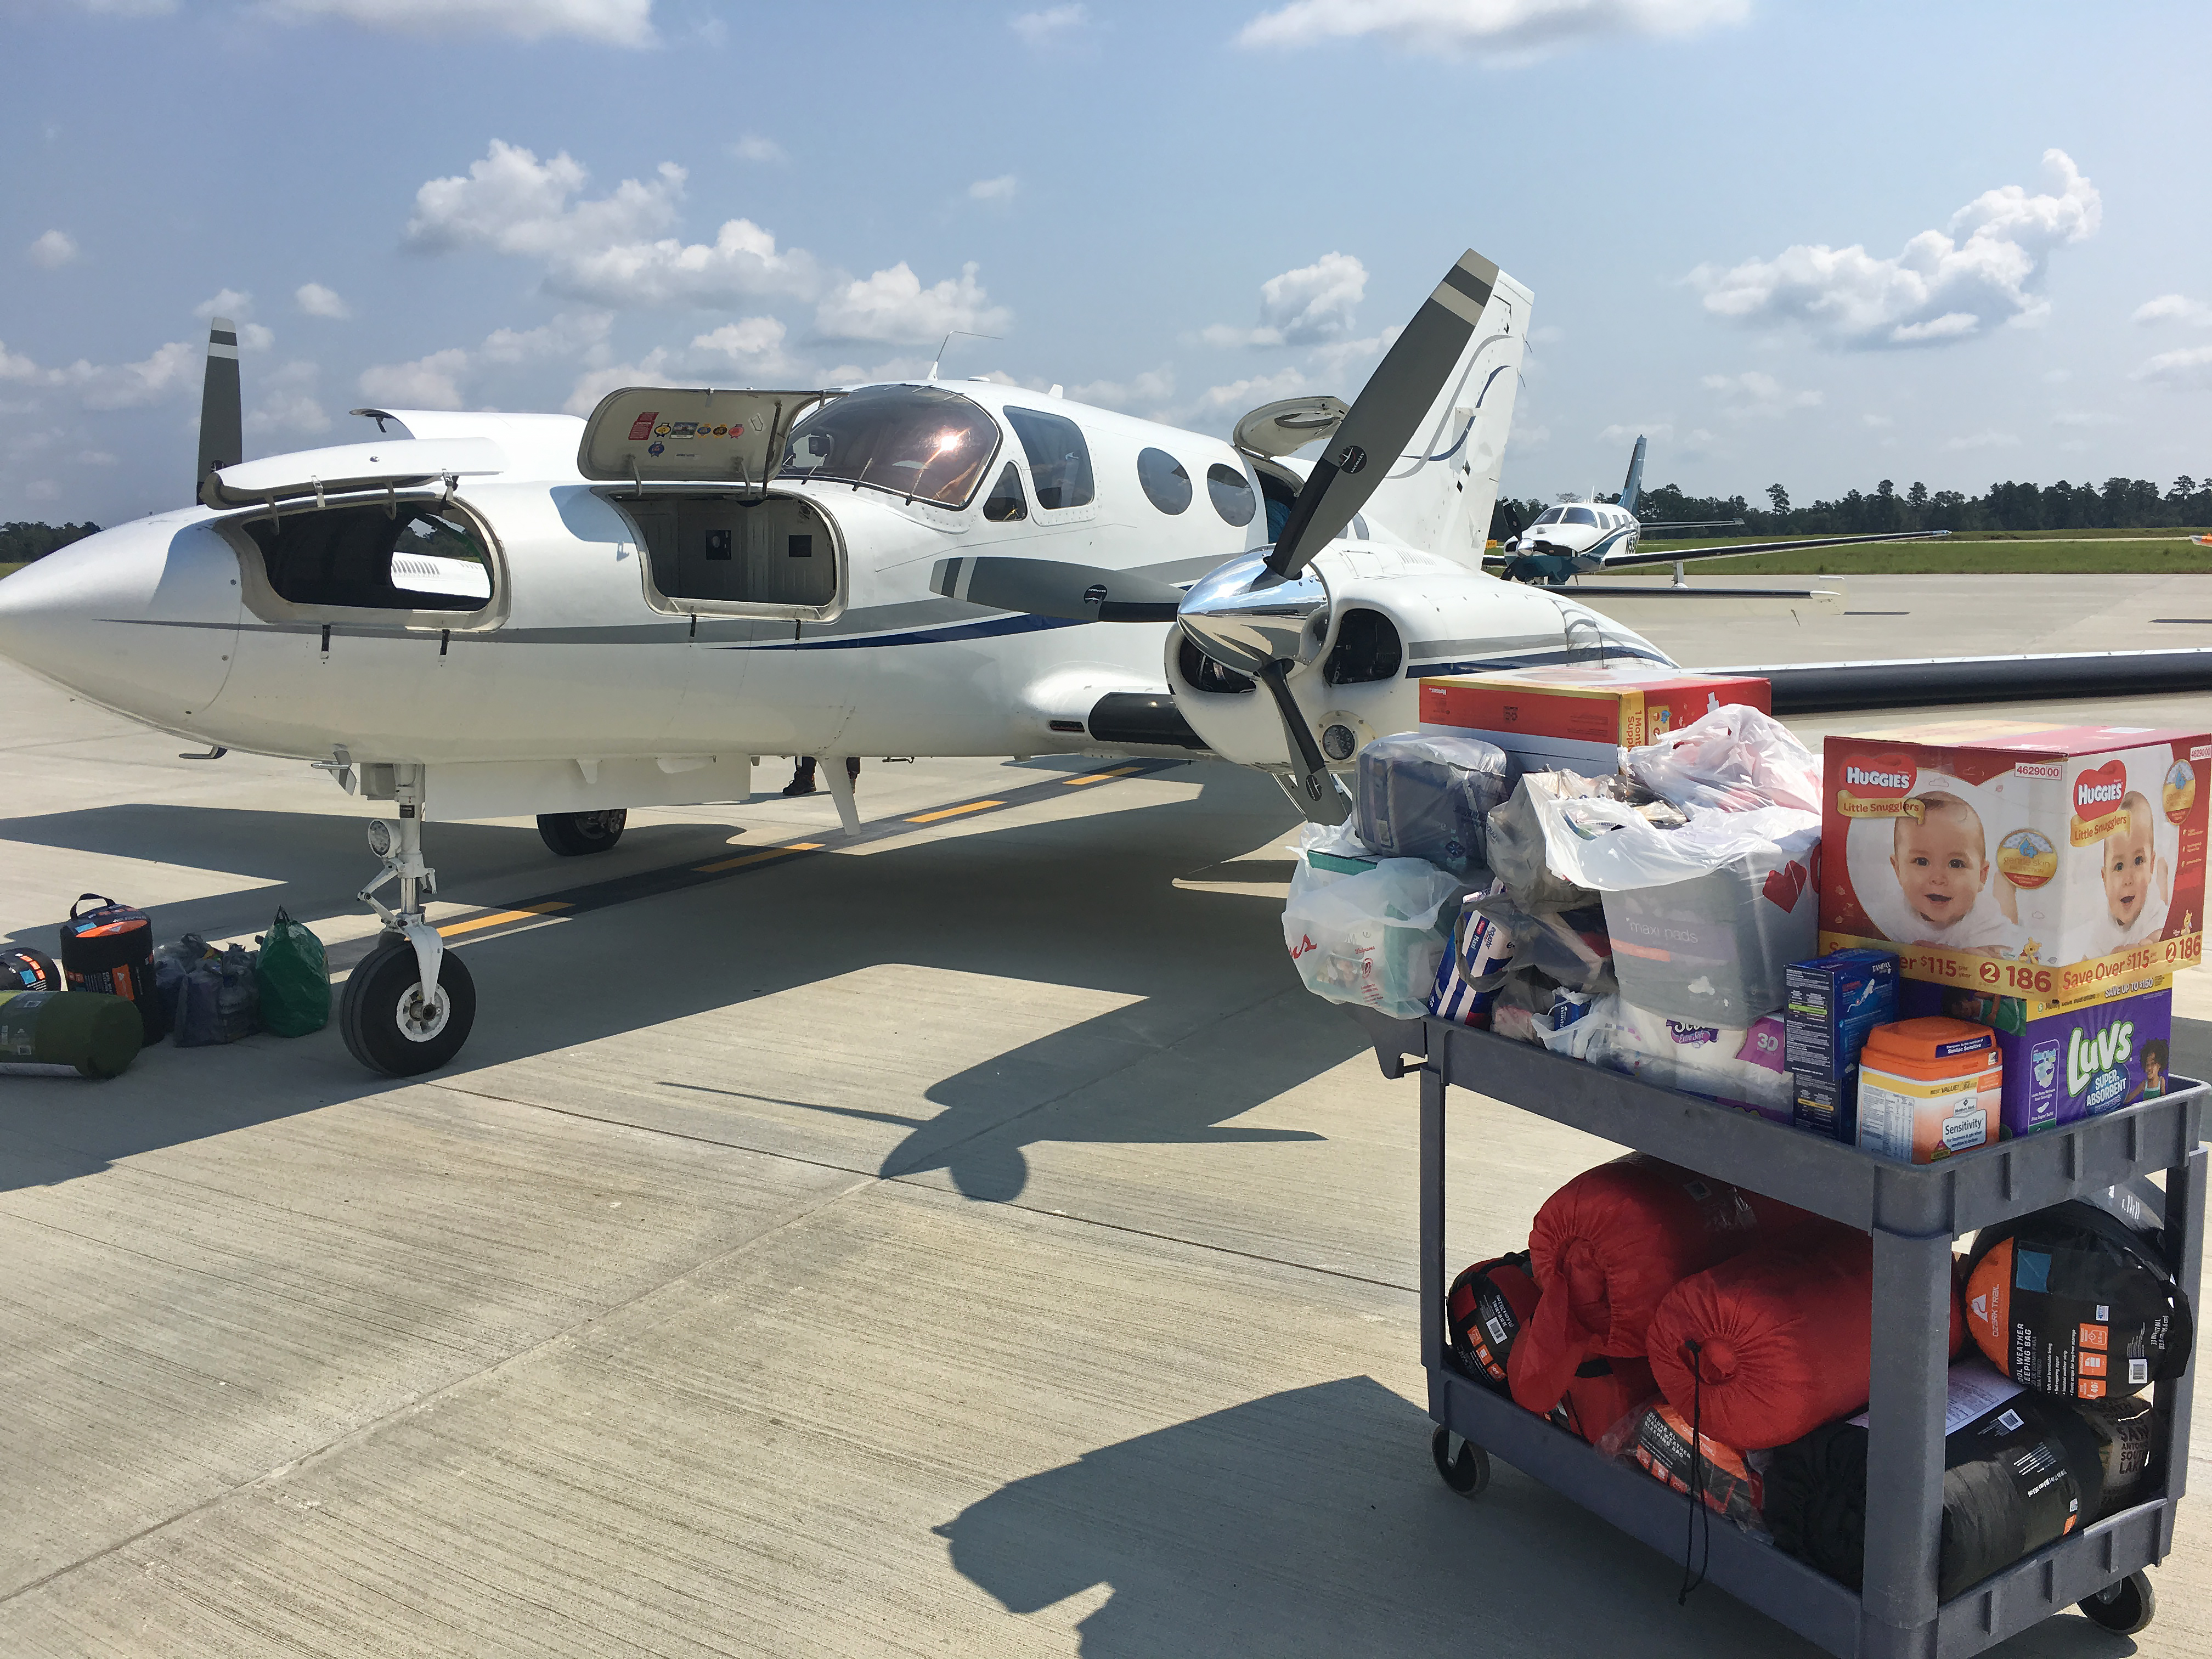 General aviation volunteers including Cessna pilot Robert Johnson contributed to Operation Airdrop, a grassroots and crowd-funded rescue organization that sprung up in Hurricane Harvey’s aftermath. Photo courtesy of Robert Johnson.